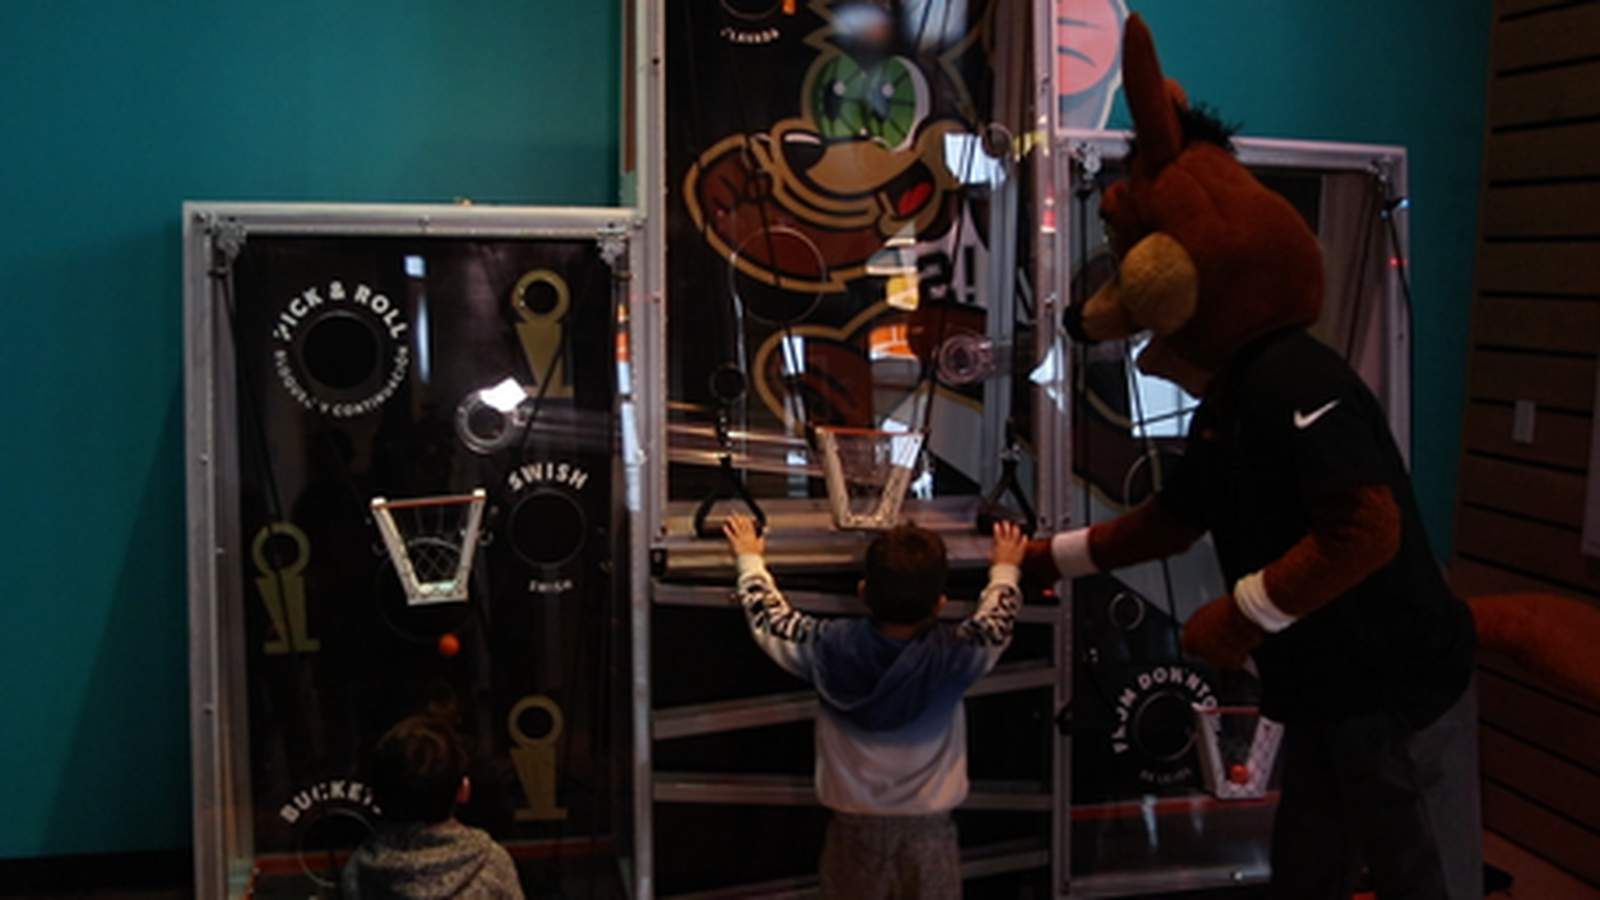 Spurs team up with DoSeum to unveil new interactive exhibit for kids